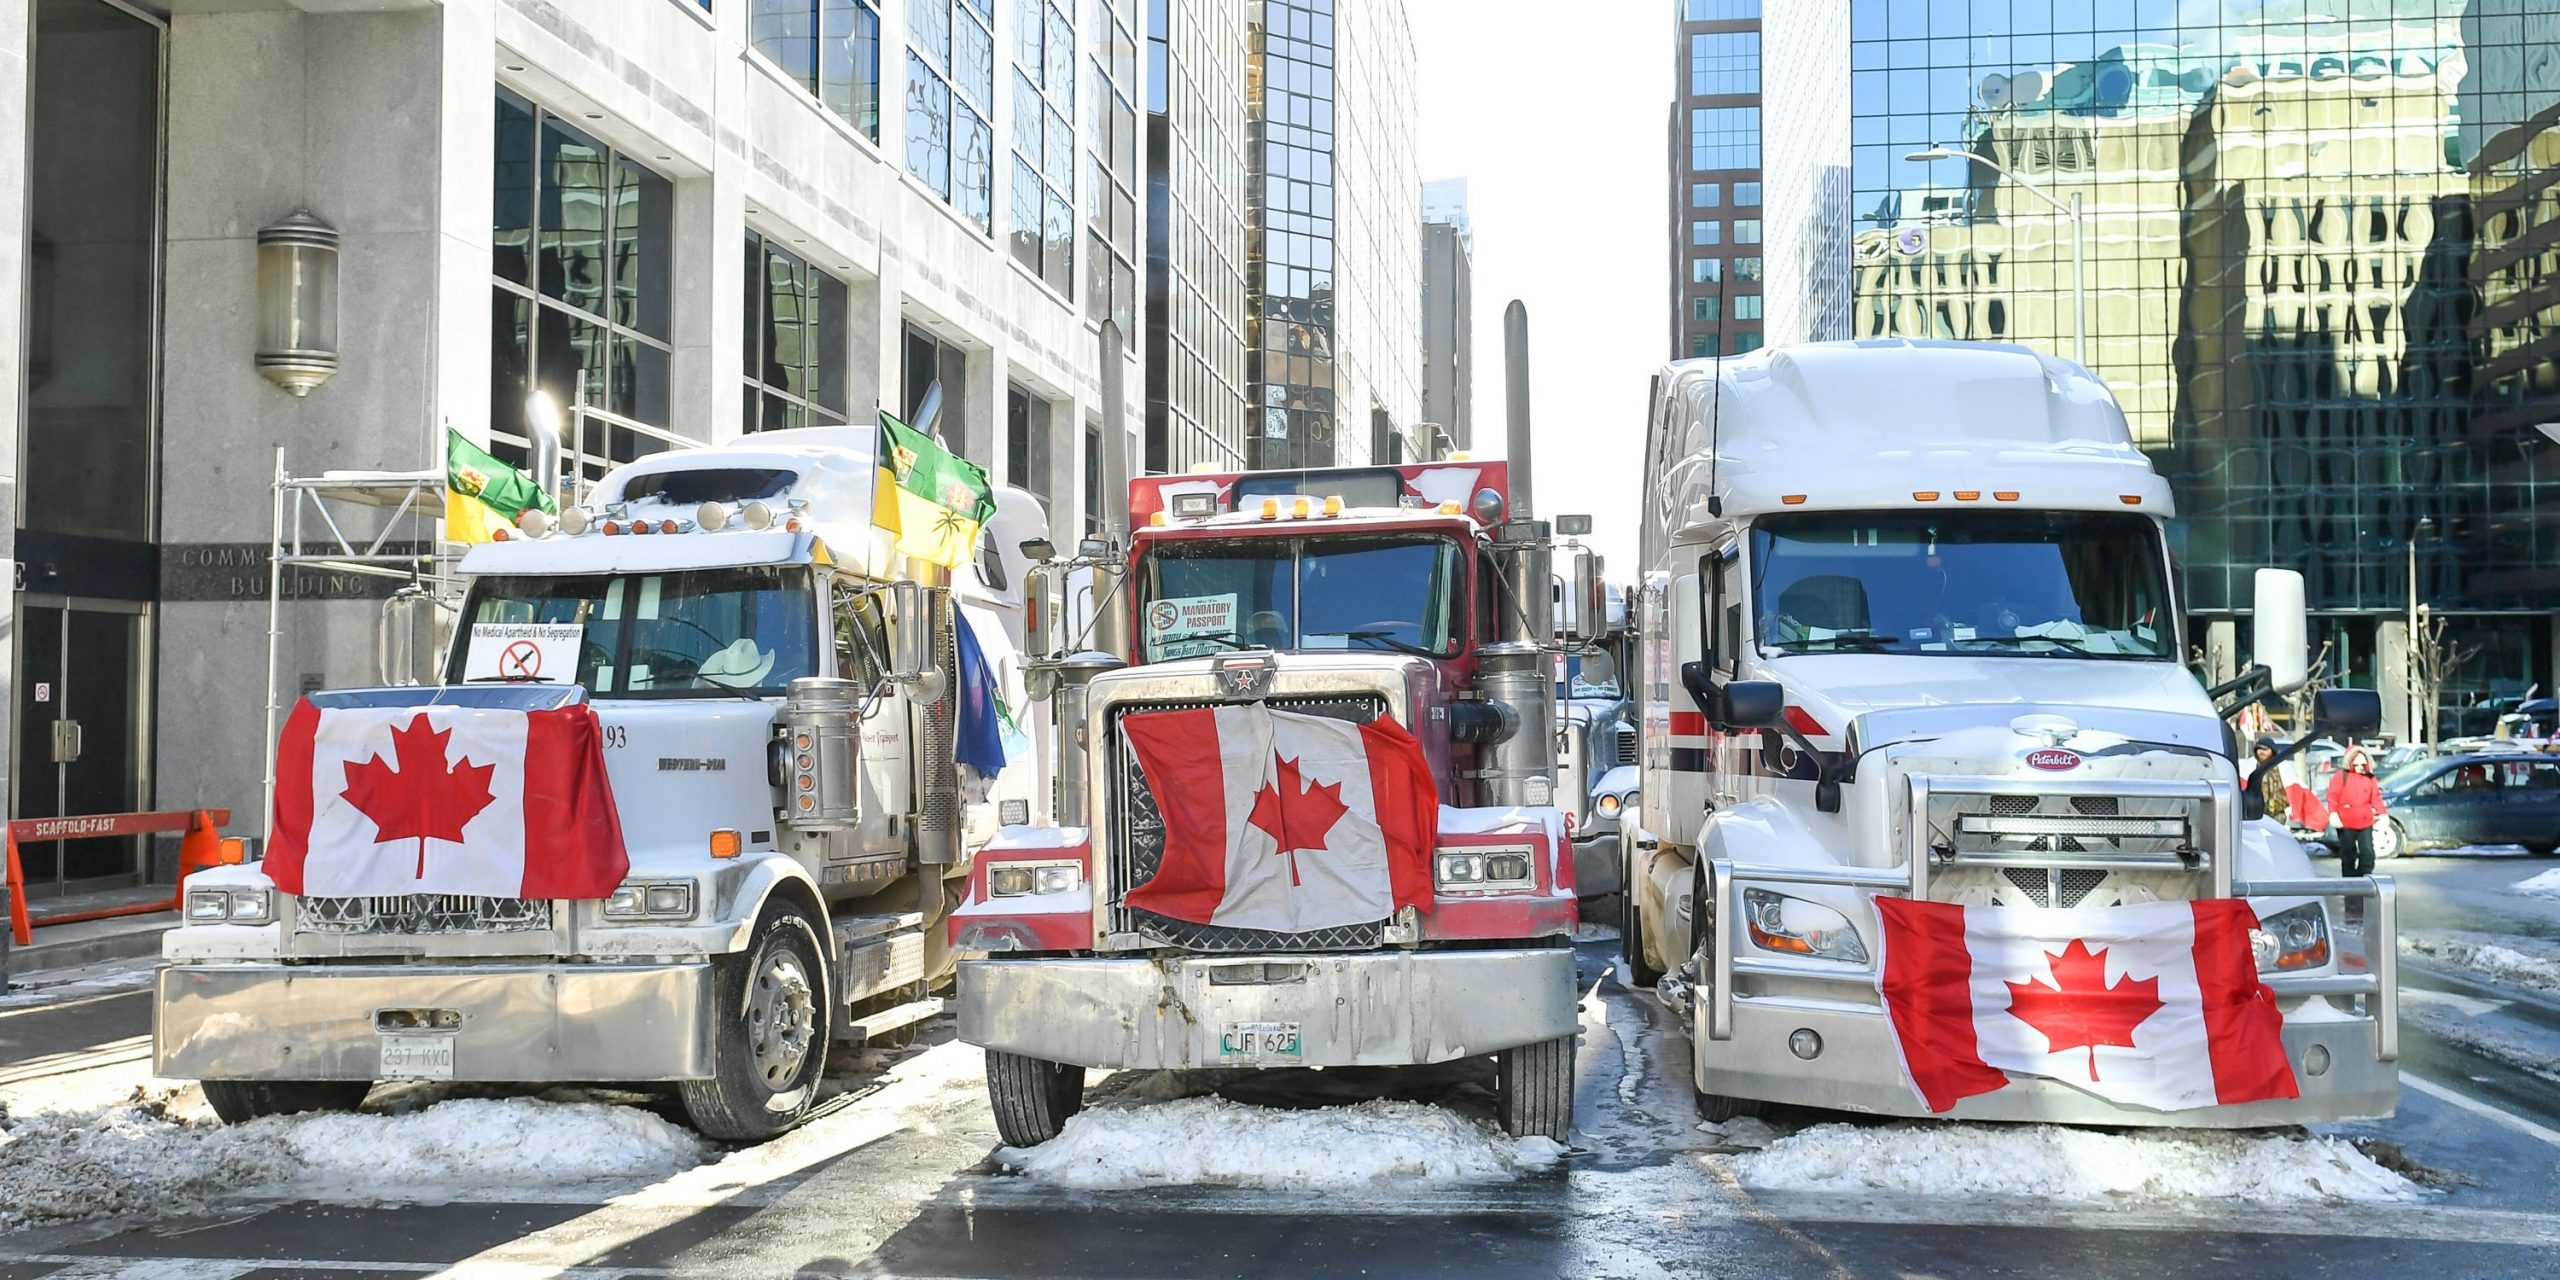 Truckers lineup their trucks on Metcalfe Street as they honk their horns on February 5, 2022 in Ottawa, Canada.